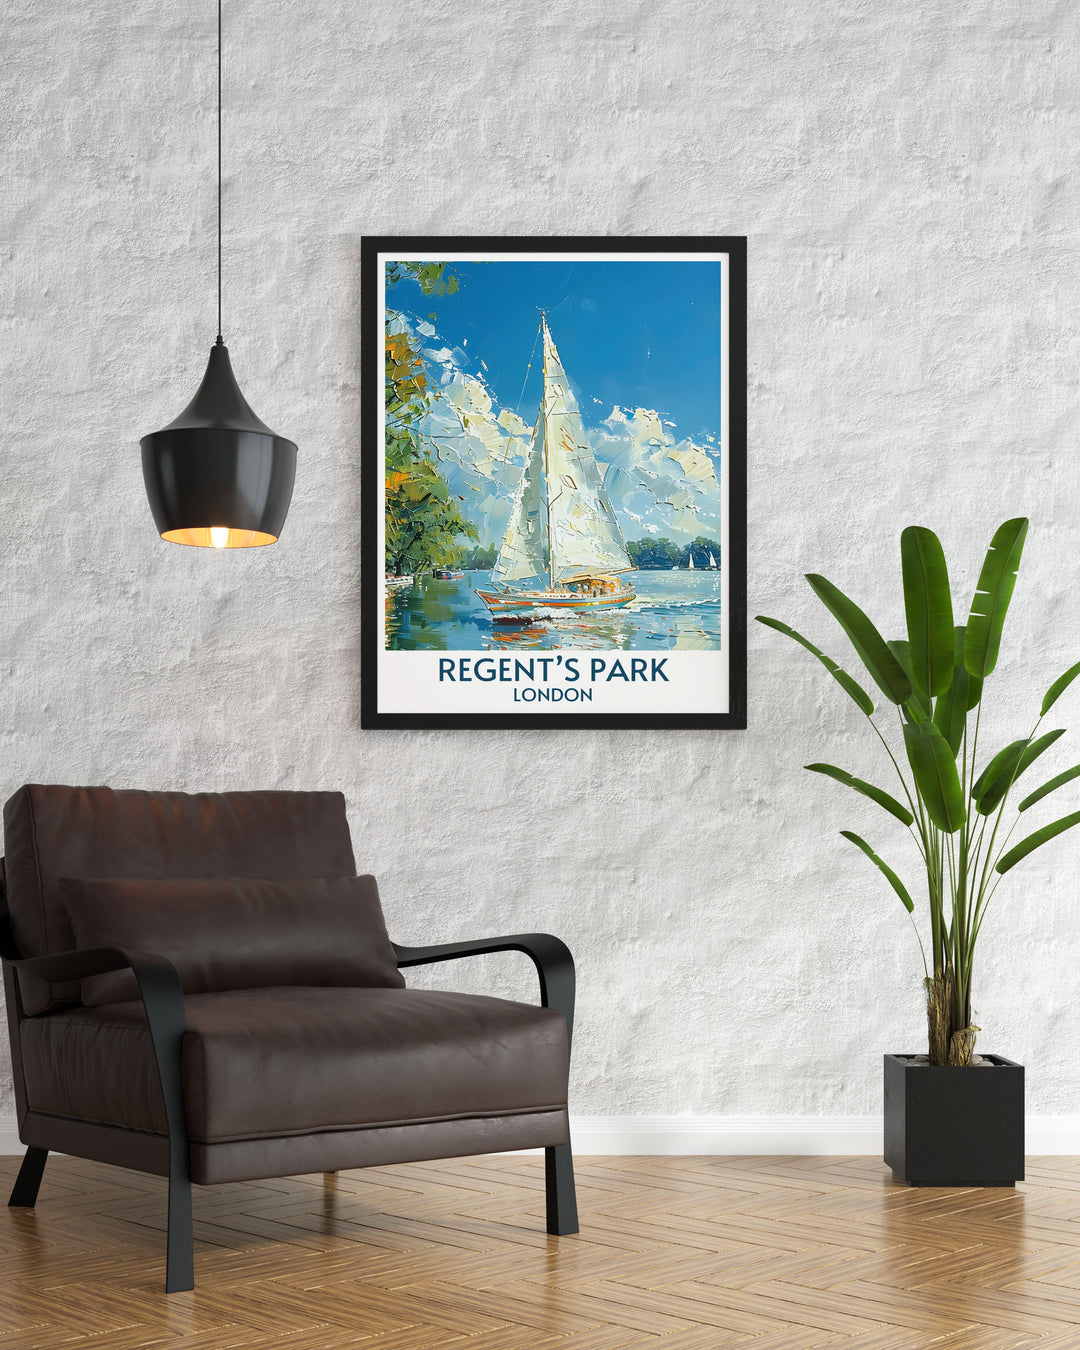 Stunning Wall Art of Regents Park, showcasing the tranquil beauty of Londons famous park and boating lake, ideal for adding a touch of nature to your living space.